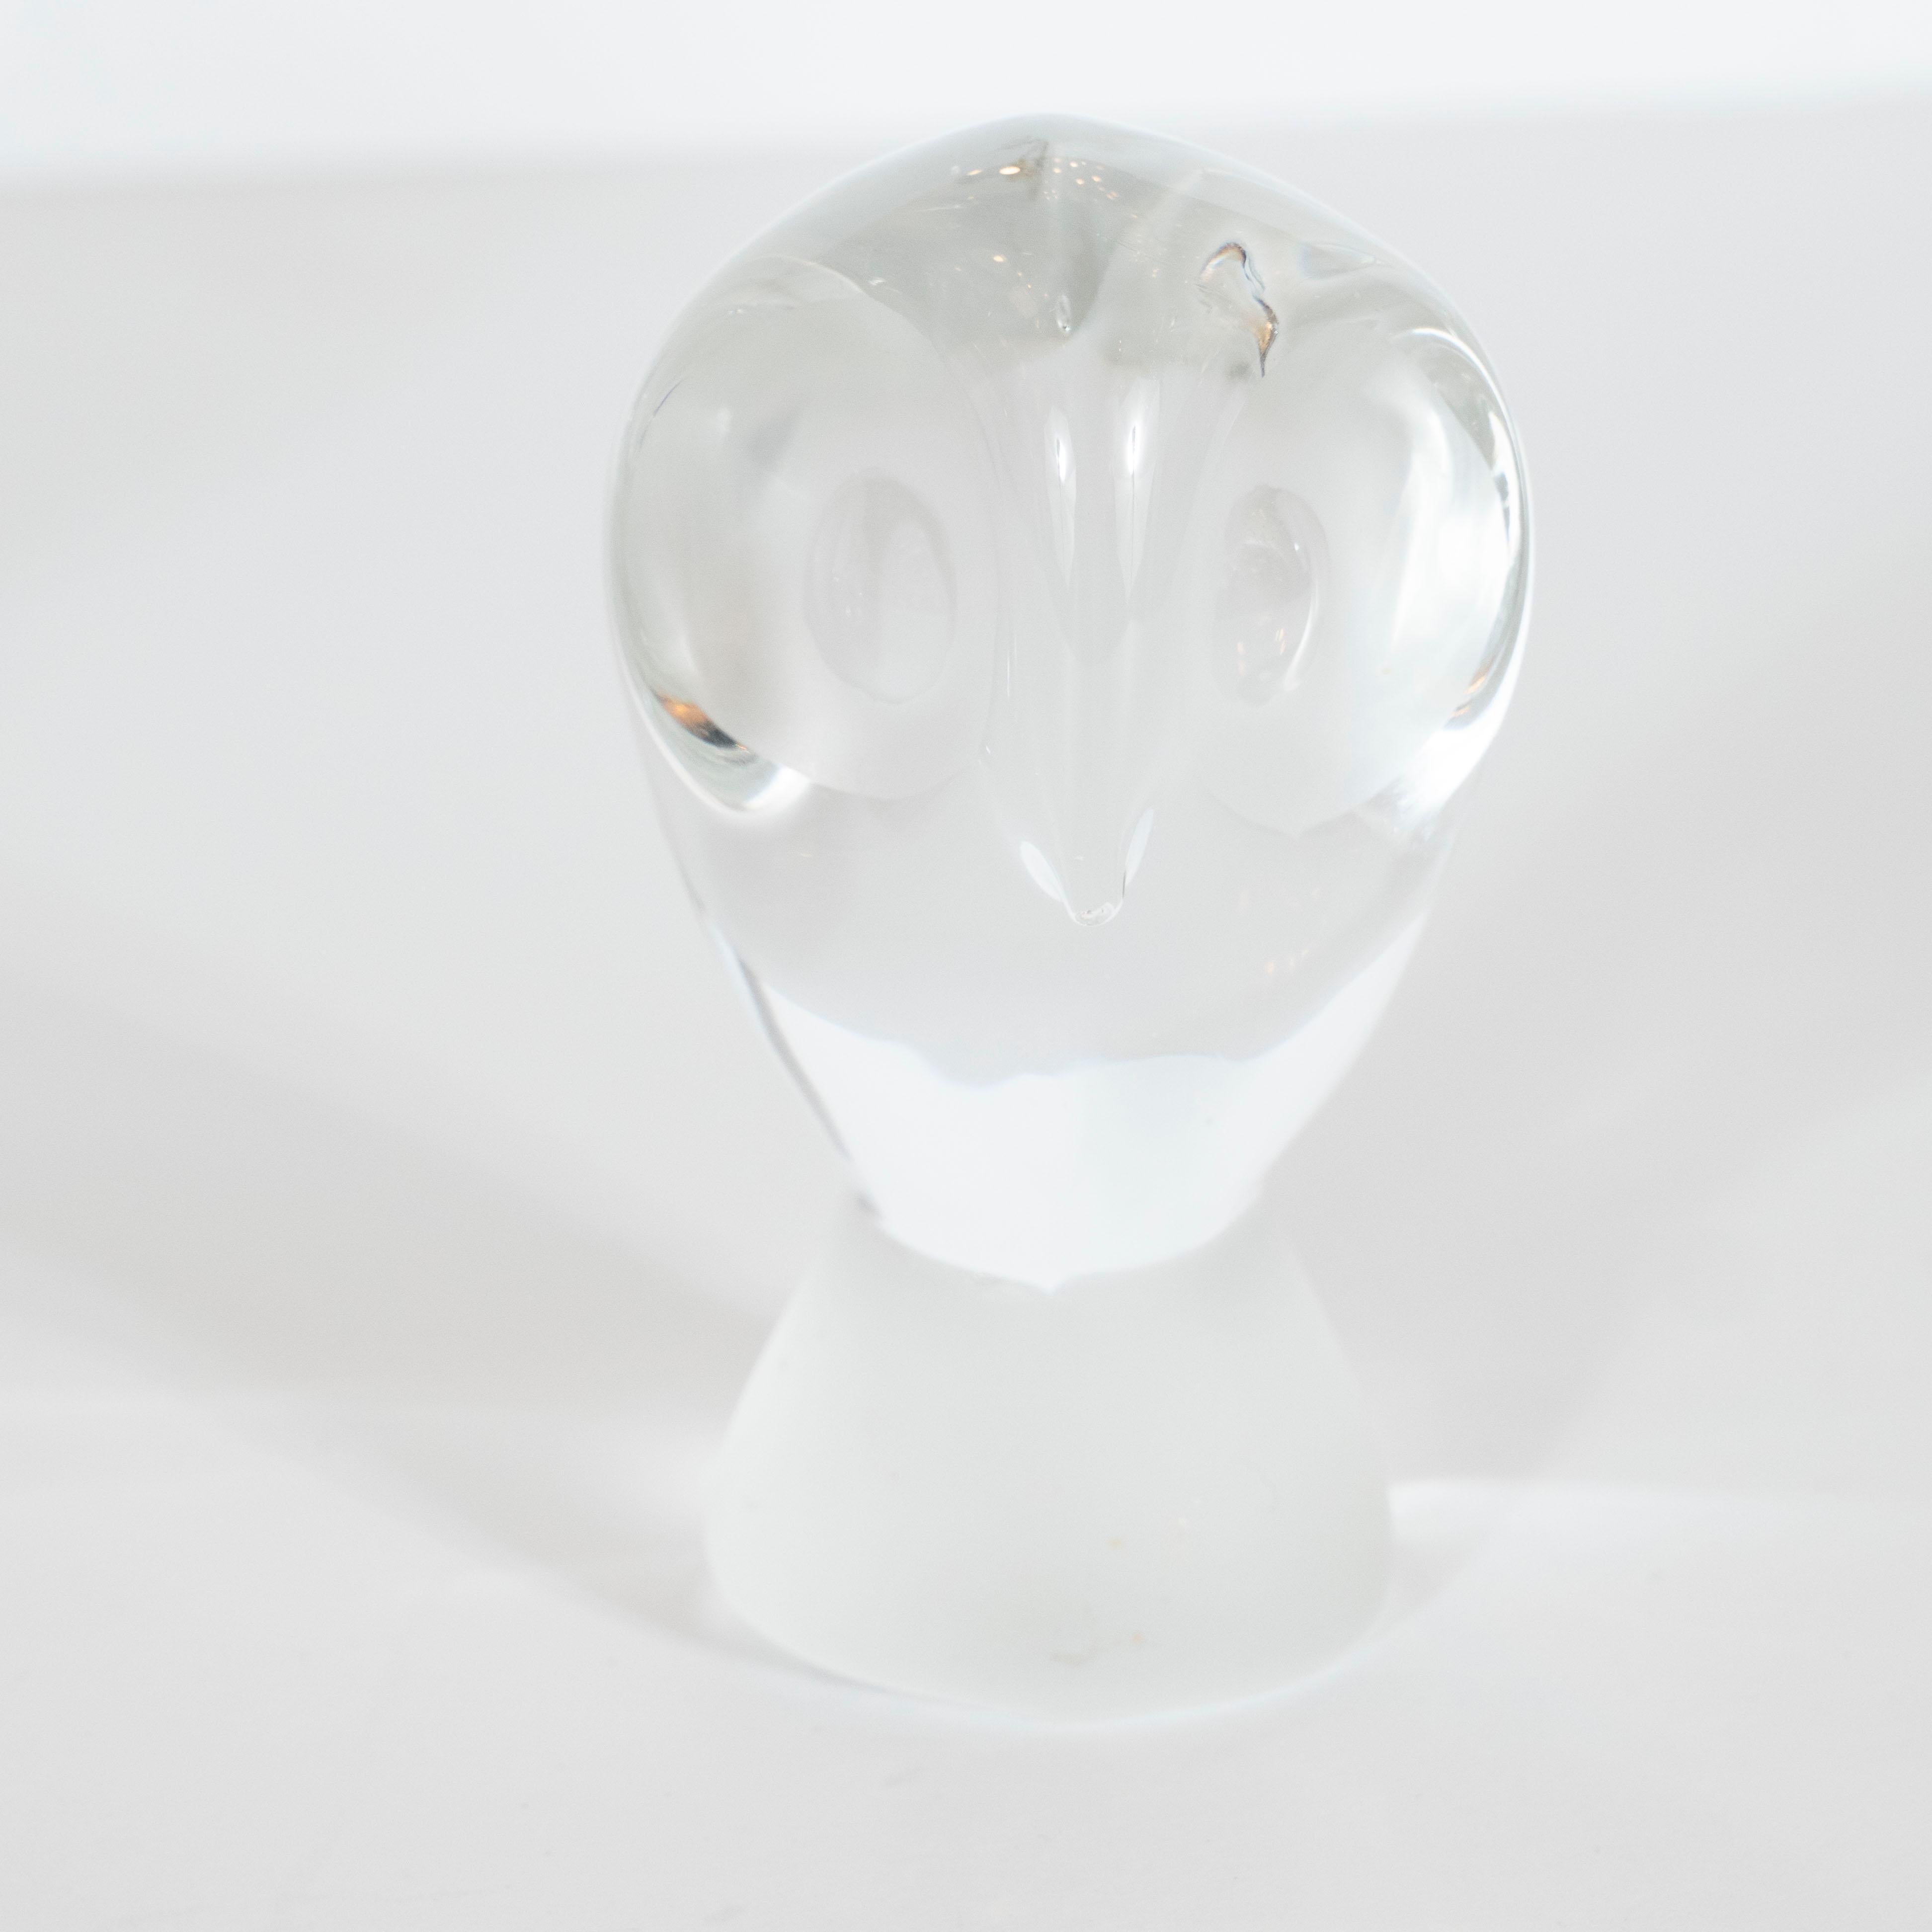 This glass paperweight/ decorative object was handmade in the United States circa 1960. It offers an abstracted rendition of a perched owl. The Owl's face is divided in half by a gestural beak, its eyes are fire polished hemispheres set in